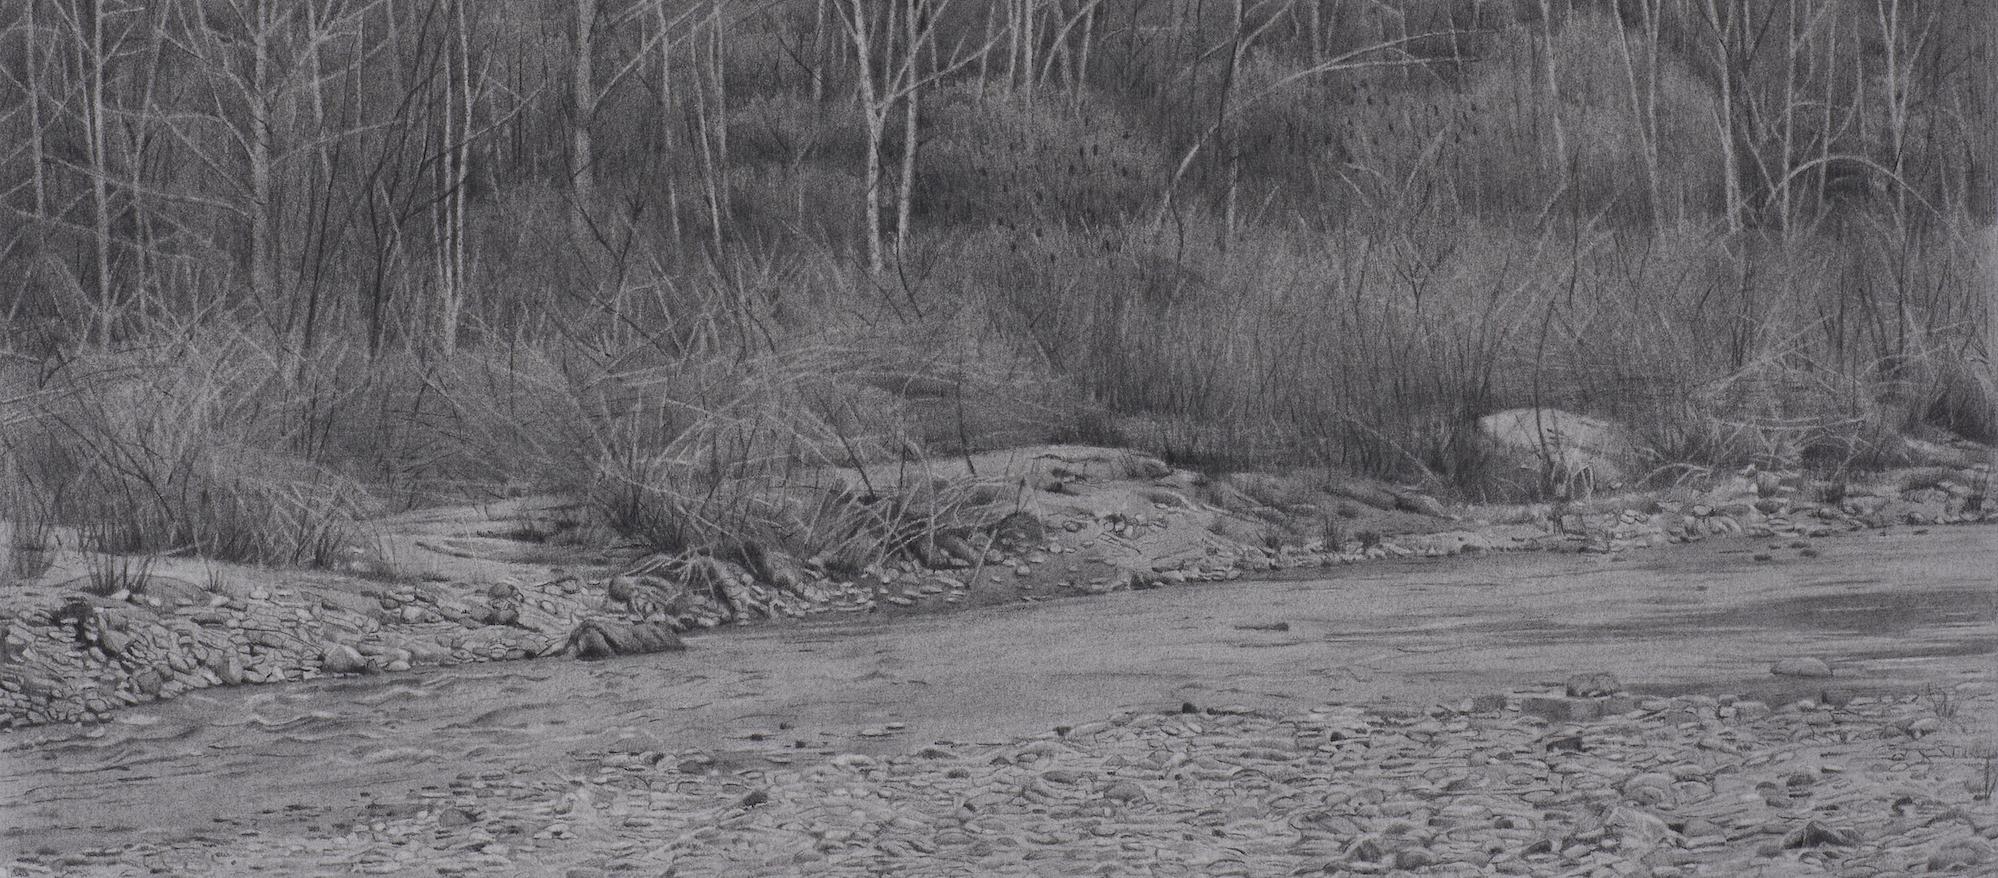 Riverbank 5, photorealist graphite landscape drawing, 2021 - Art by Mary Reilly